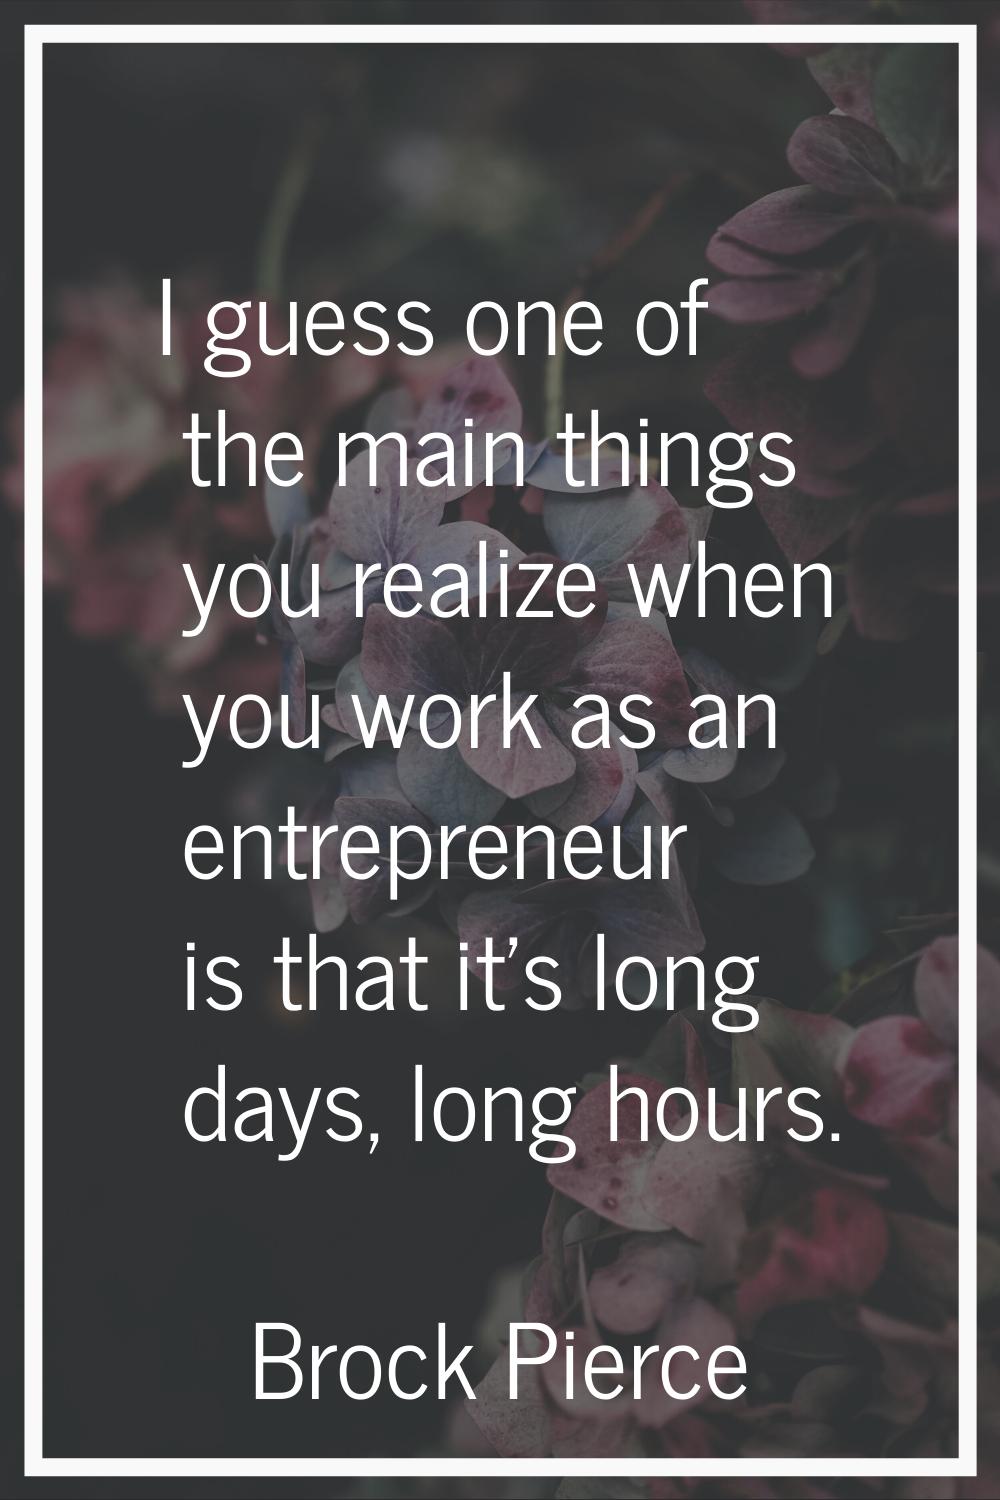 I guess one of the main things you realize when you work as an entrepreneur is that it's long days,